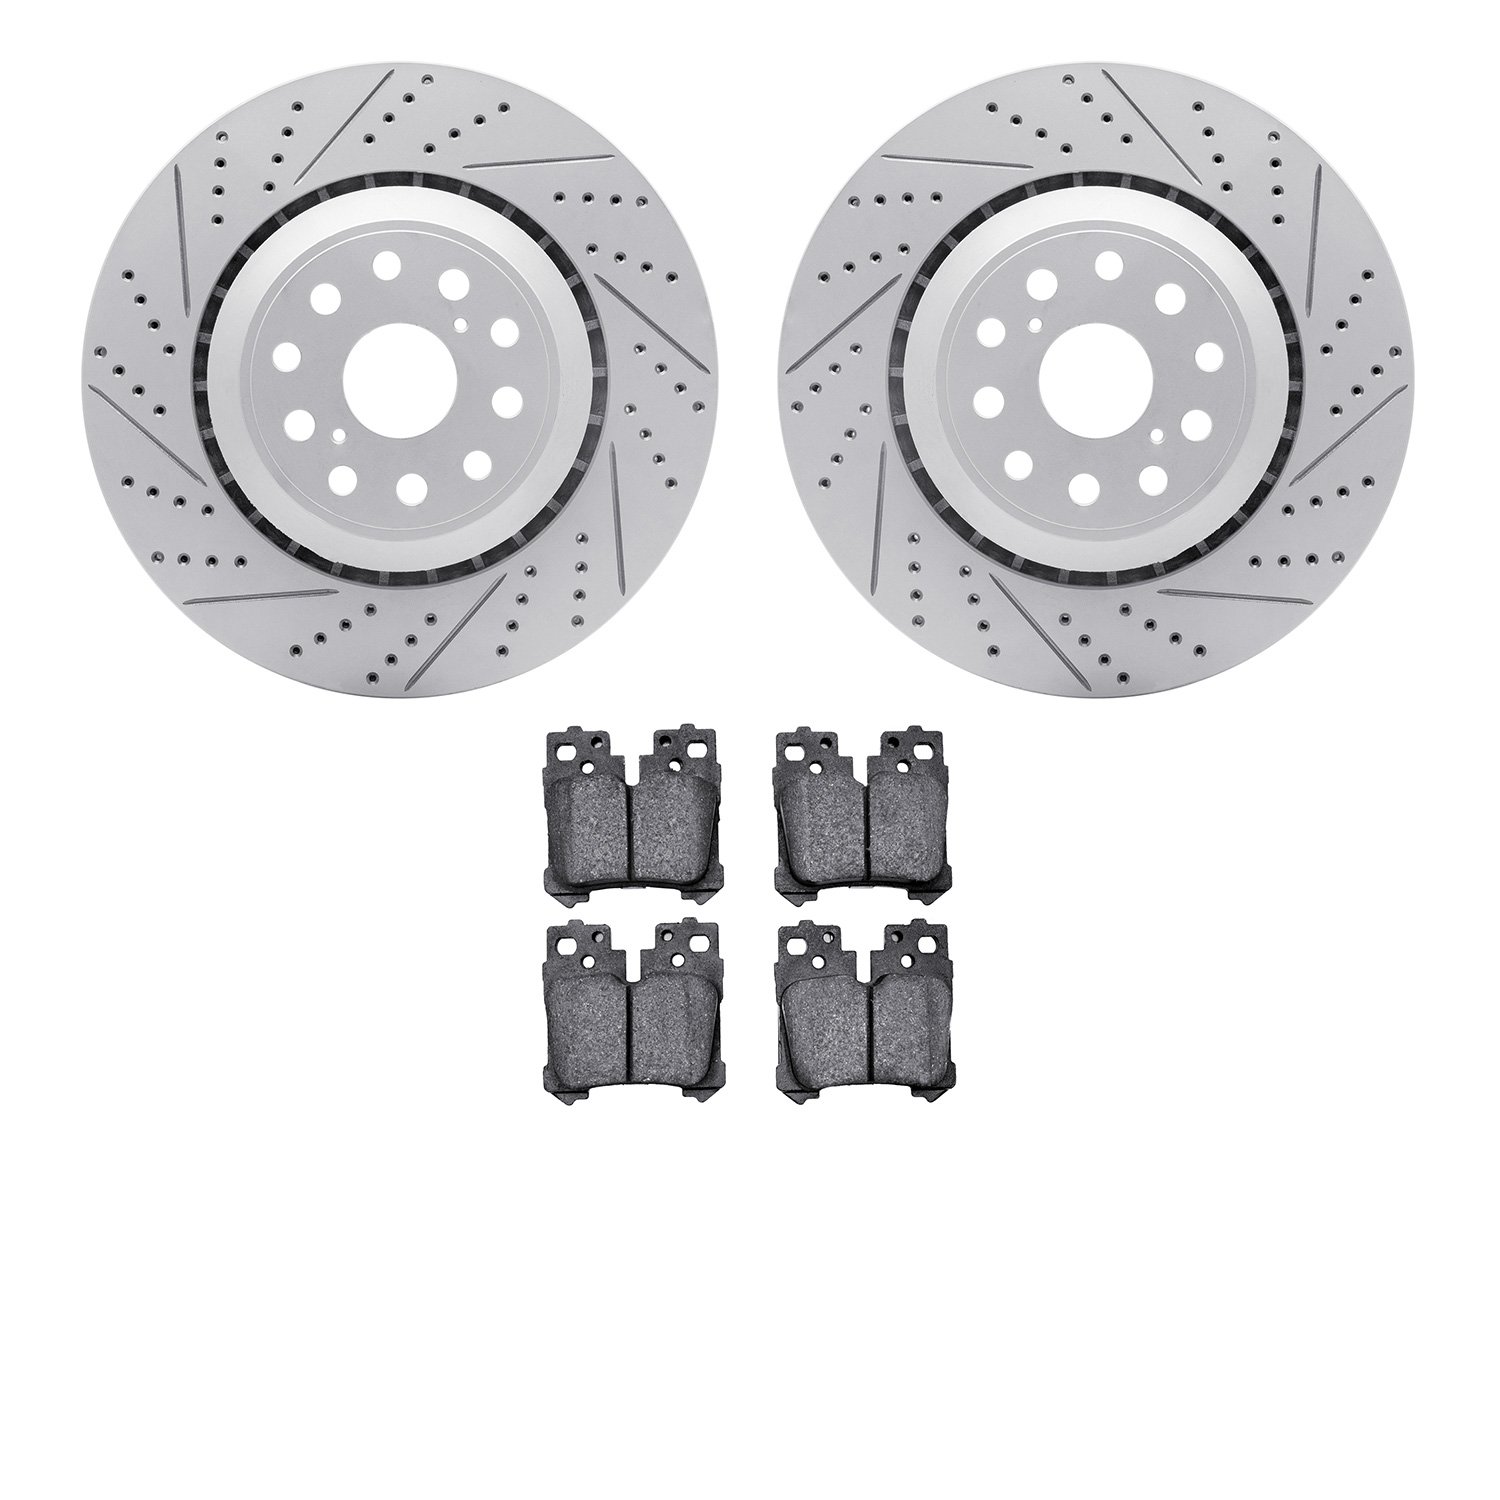 2502-75035 Geoperformance Drilled/Slotted Rotors w/5000 Advanced Brake Pads Kit, 2007-2017 Lexus/Toyota/Scion, Position: Rear